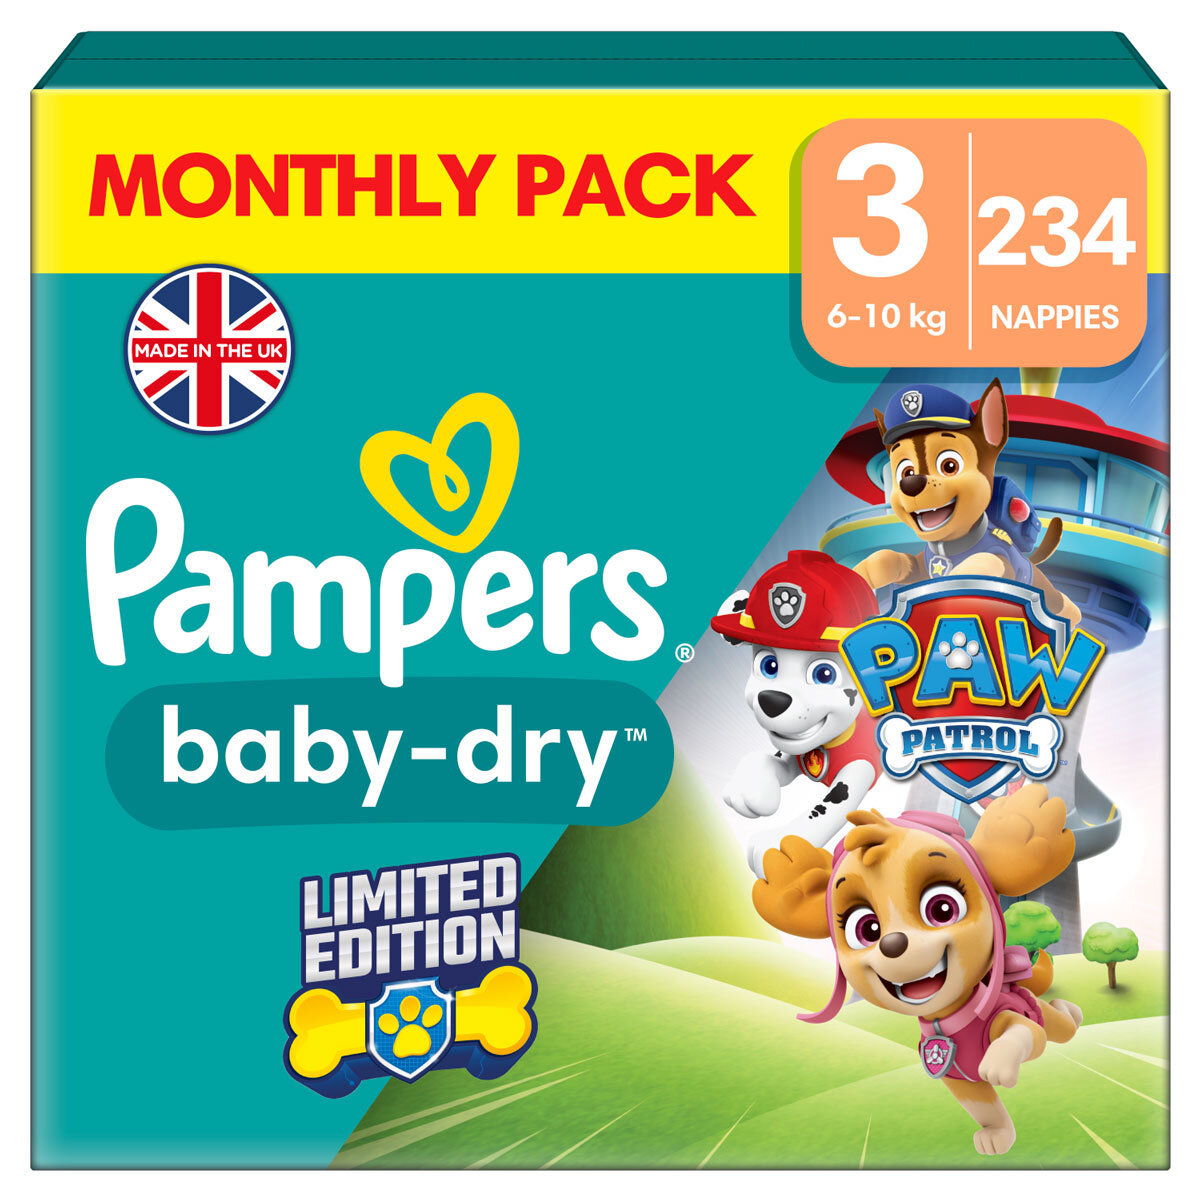 Pampers Paw Patrol Baby Dry Size 3, 234 Pack